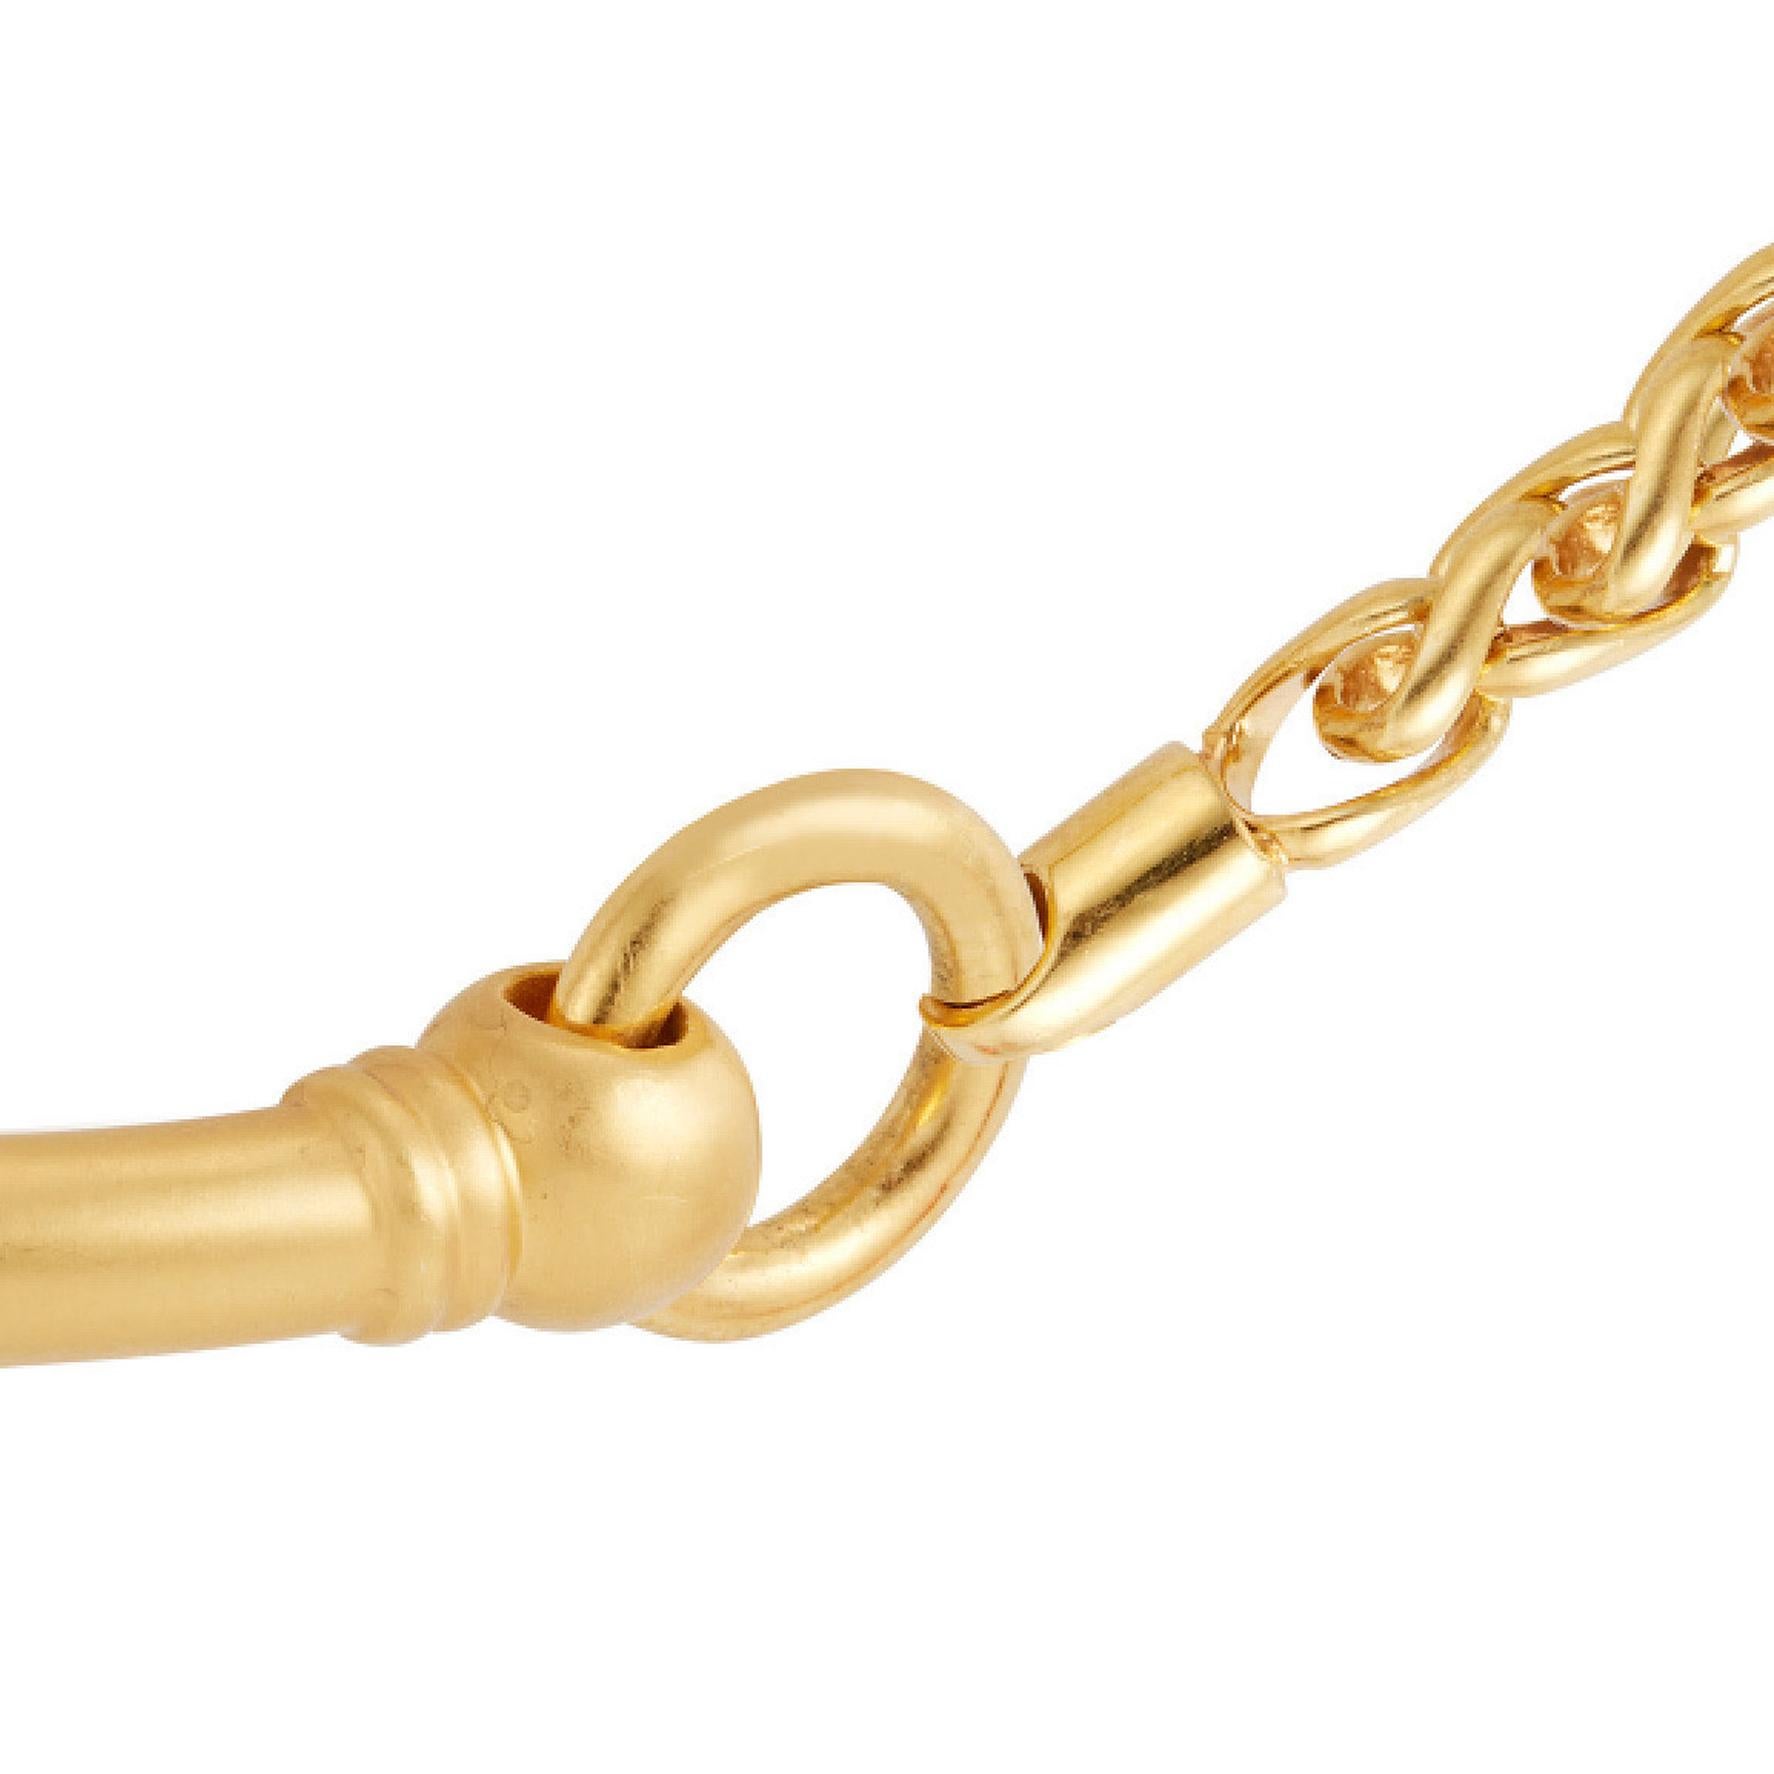 This choker is a stunning and regal piece that has the staple Senelagos bar with a satin finish and is surrounded by a Russian wheat chain, finished with a unique Chee Lee toggle closure. A must-have piece, in 22 Karat gold vermeil.

All items are